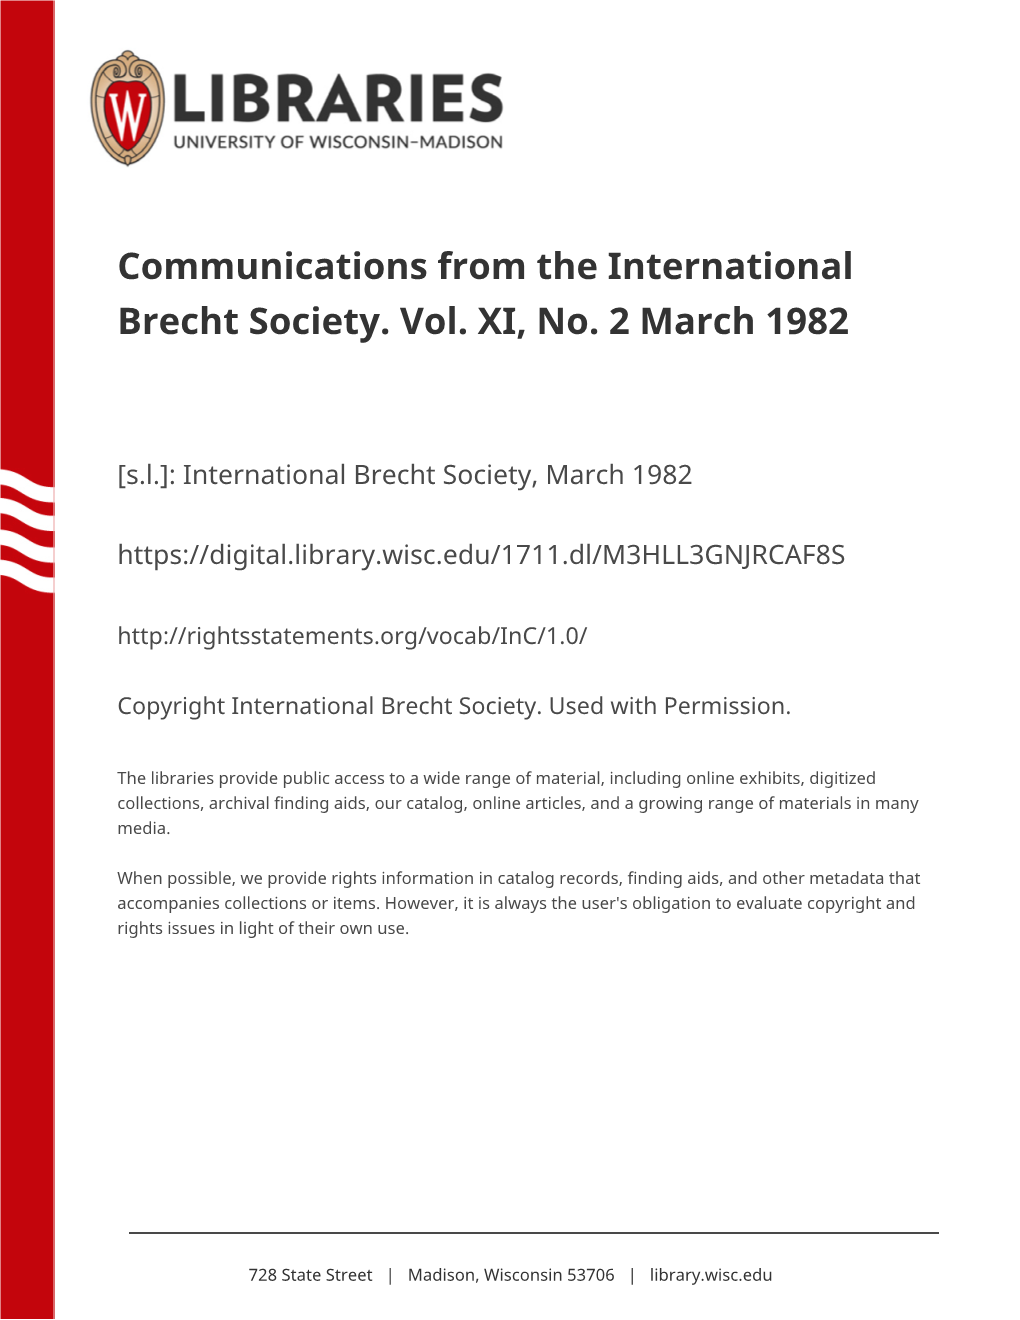 Communications from the International Brecht Society. Vol. XI, No